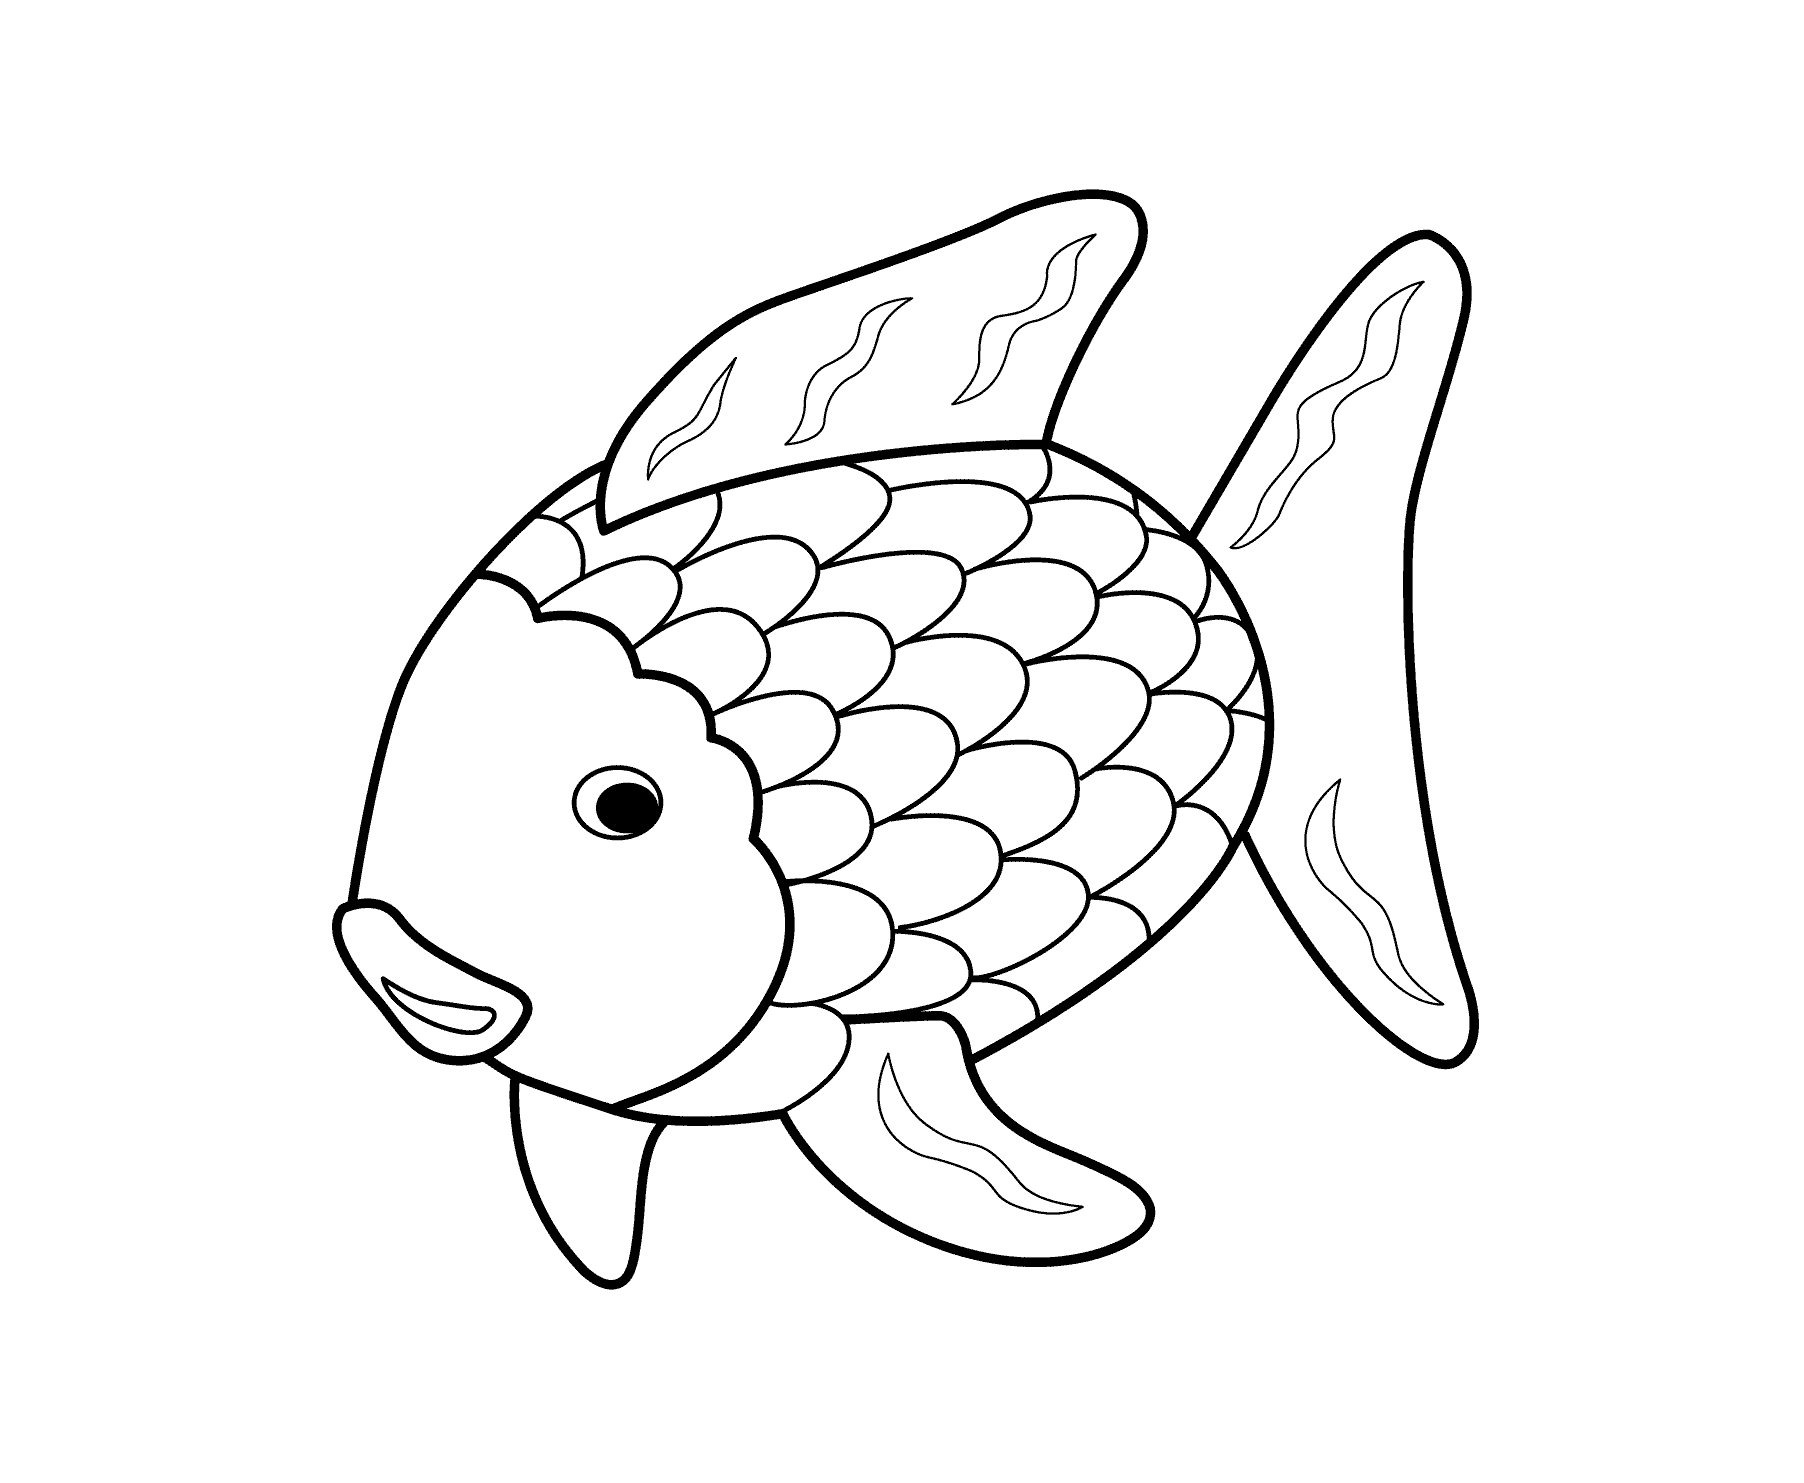 Rainbow Fish Coloring Page Coloring Home